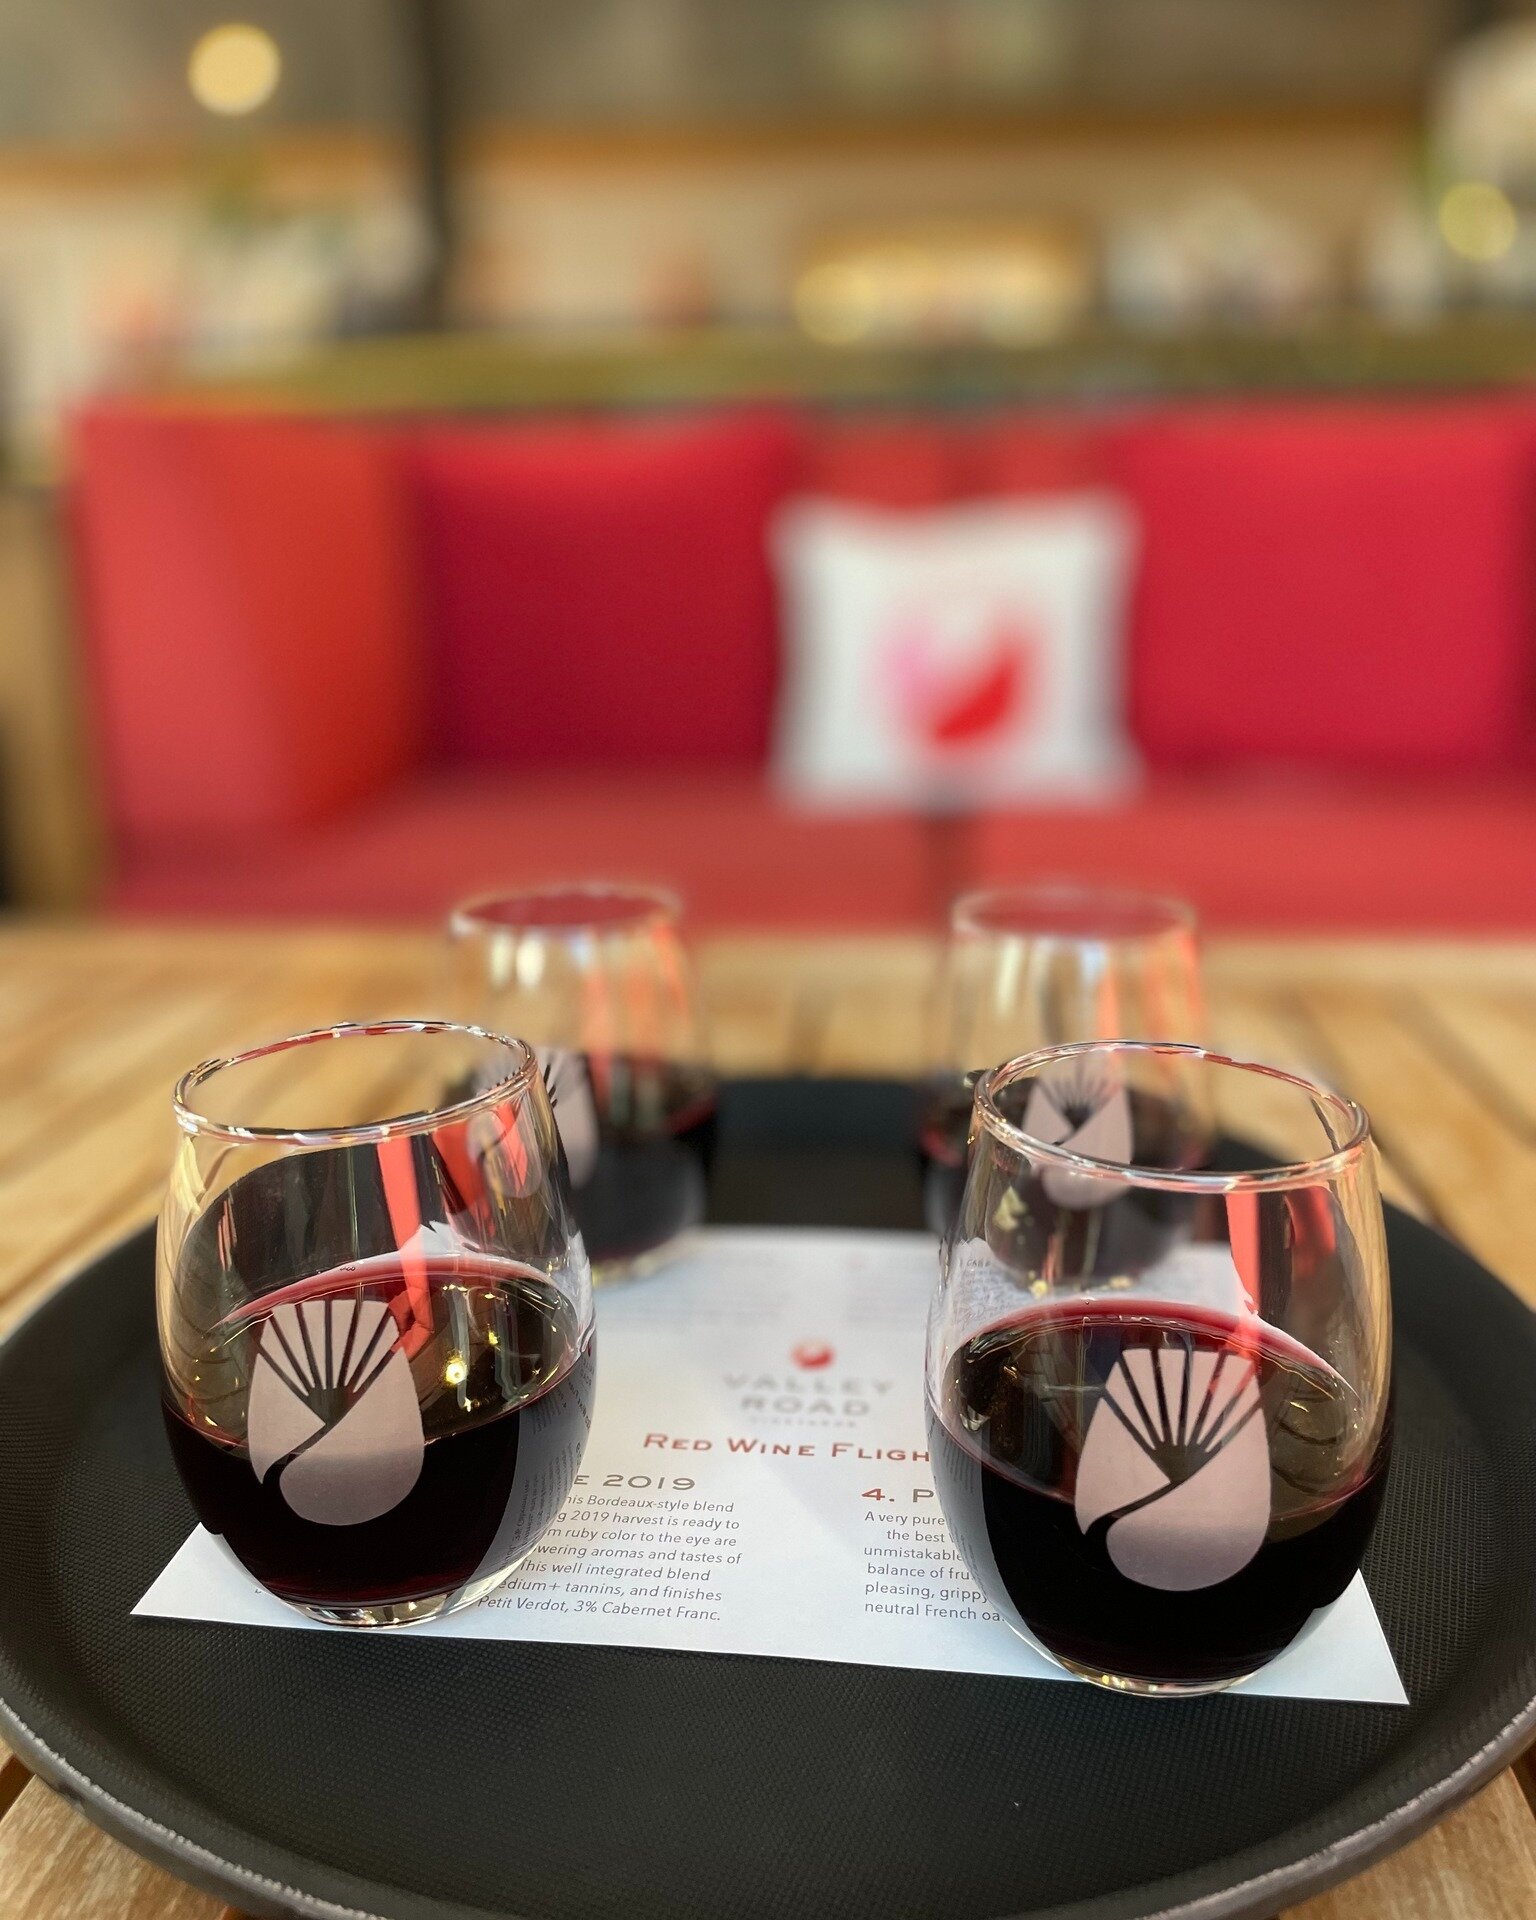 ☔️ We've got the cure for your rainy weekend blues! 🍷 Cozy indoor seating, plenty of wine and local grab-and-go food options, and great company! Plus, ask about our March Ros&eacute; specials. 

M-F 12 to 5:30pm
S-S 10:30am to 5:30pm

Come see us at